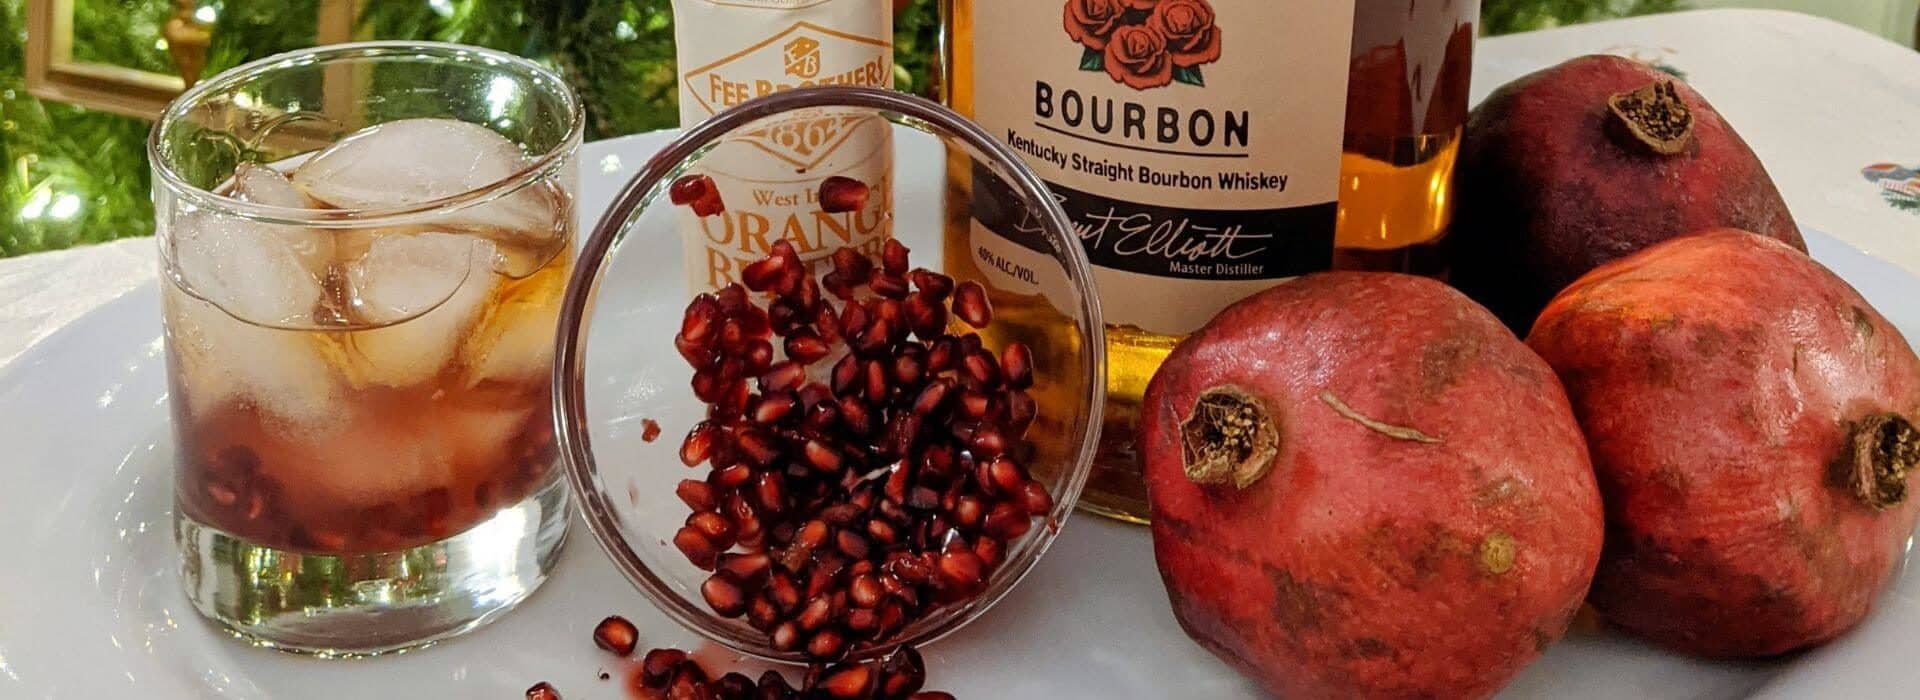 a spread of whole red pomegranates, a glass full of pomegranate seeds, bottles of bourbon and orange liqueur, and a clear glass full of ice and an amber colored beverage.